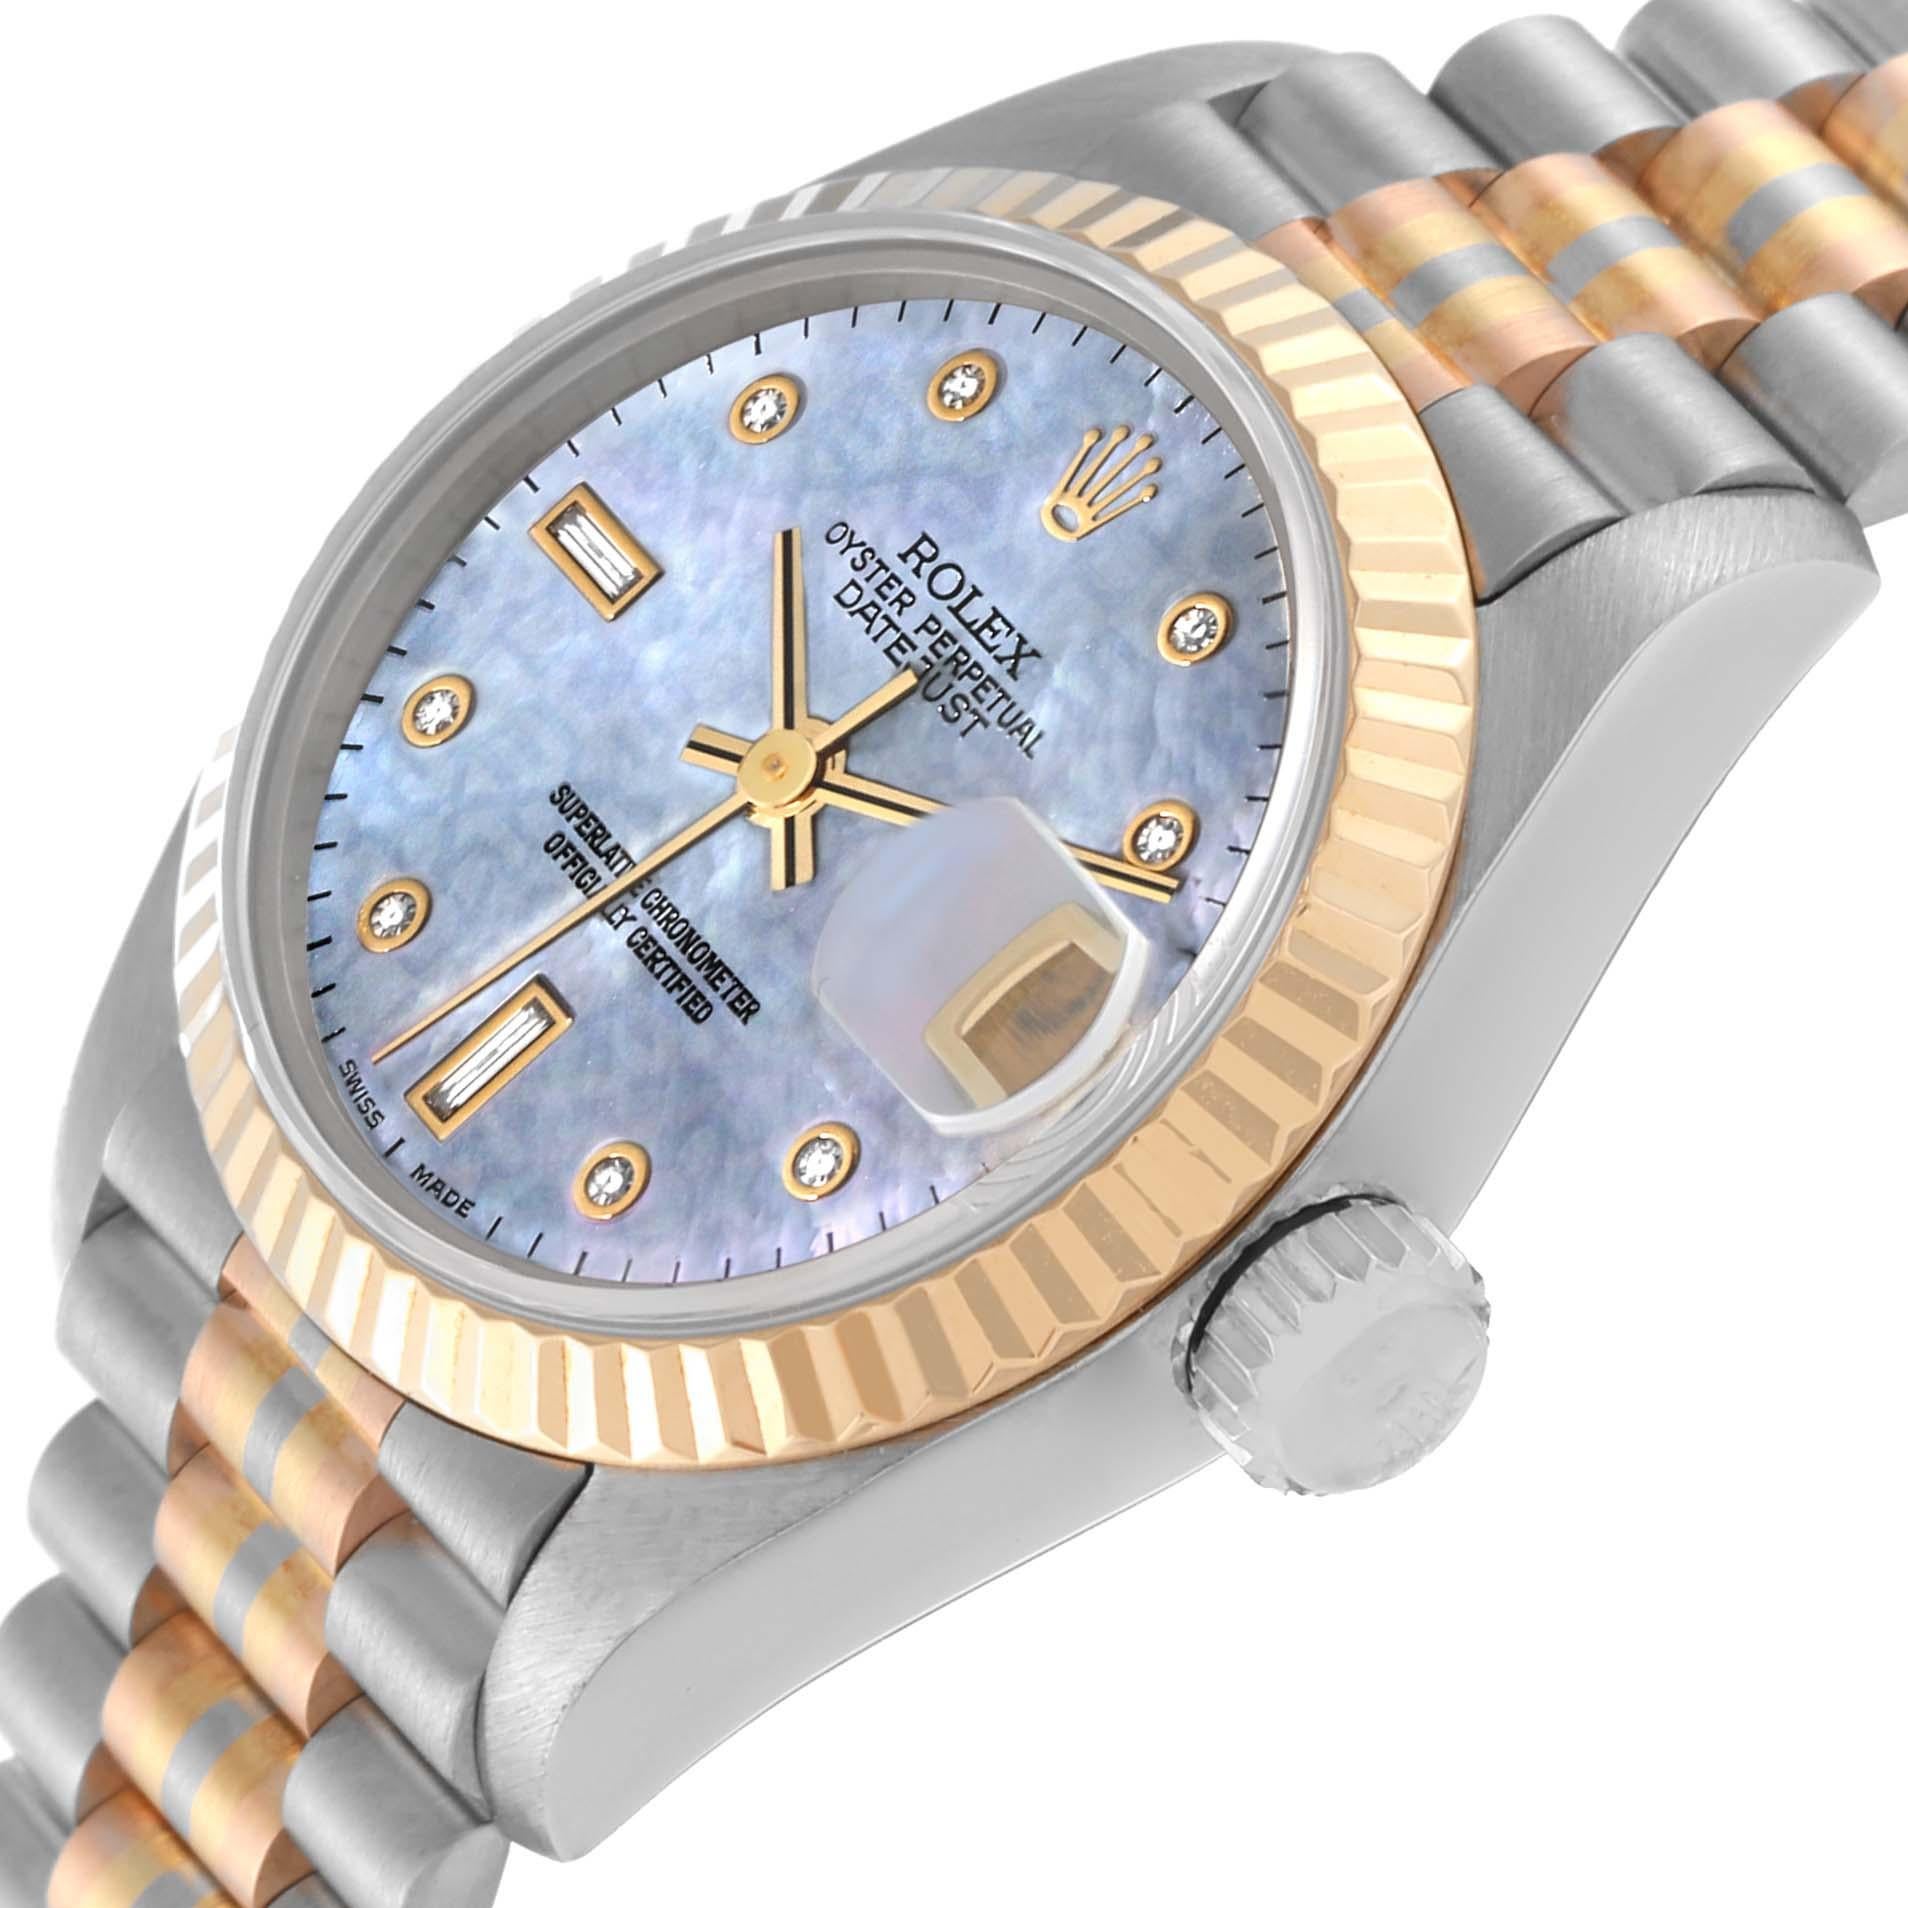 Rolex President Tridor White Yellow Rose Gold MOP Diamond Ladies Watch 69179. Officially certified chronometer self-winding movement. 18k white gold oyster case 26.0 mm in diameter. Rolex logo on a crown. 18K yellow gold fluted bezel. Scratch